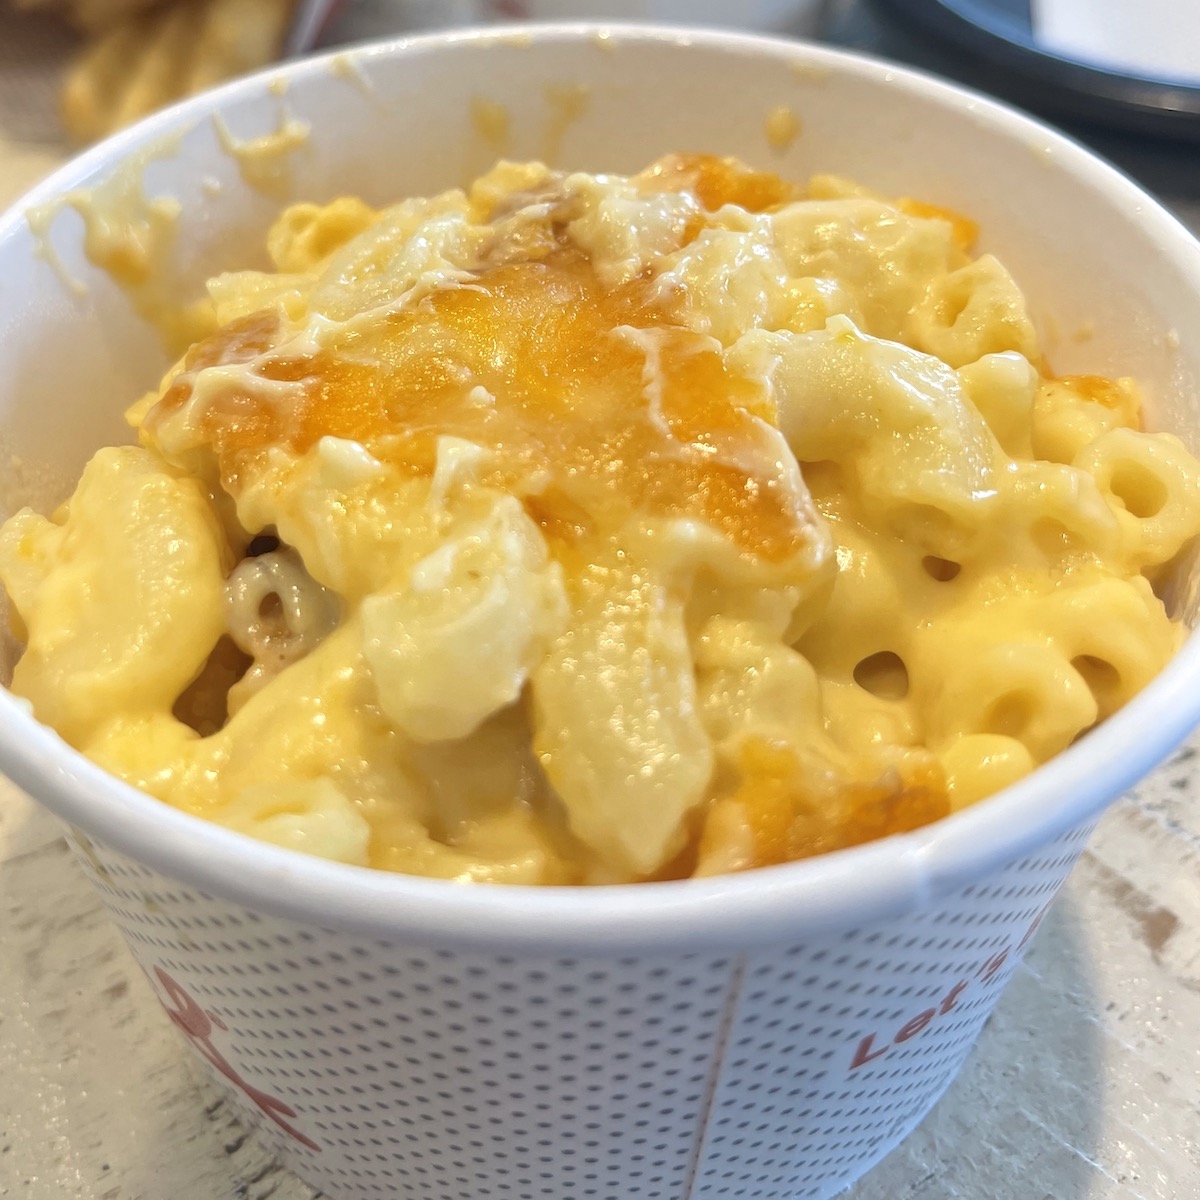 Mac & Cheese from Chick-fil-A in Hialeah, Florida